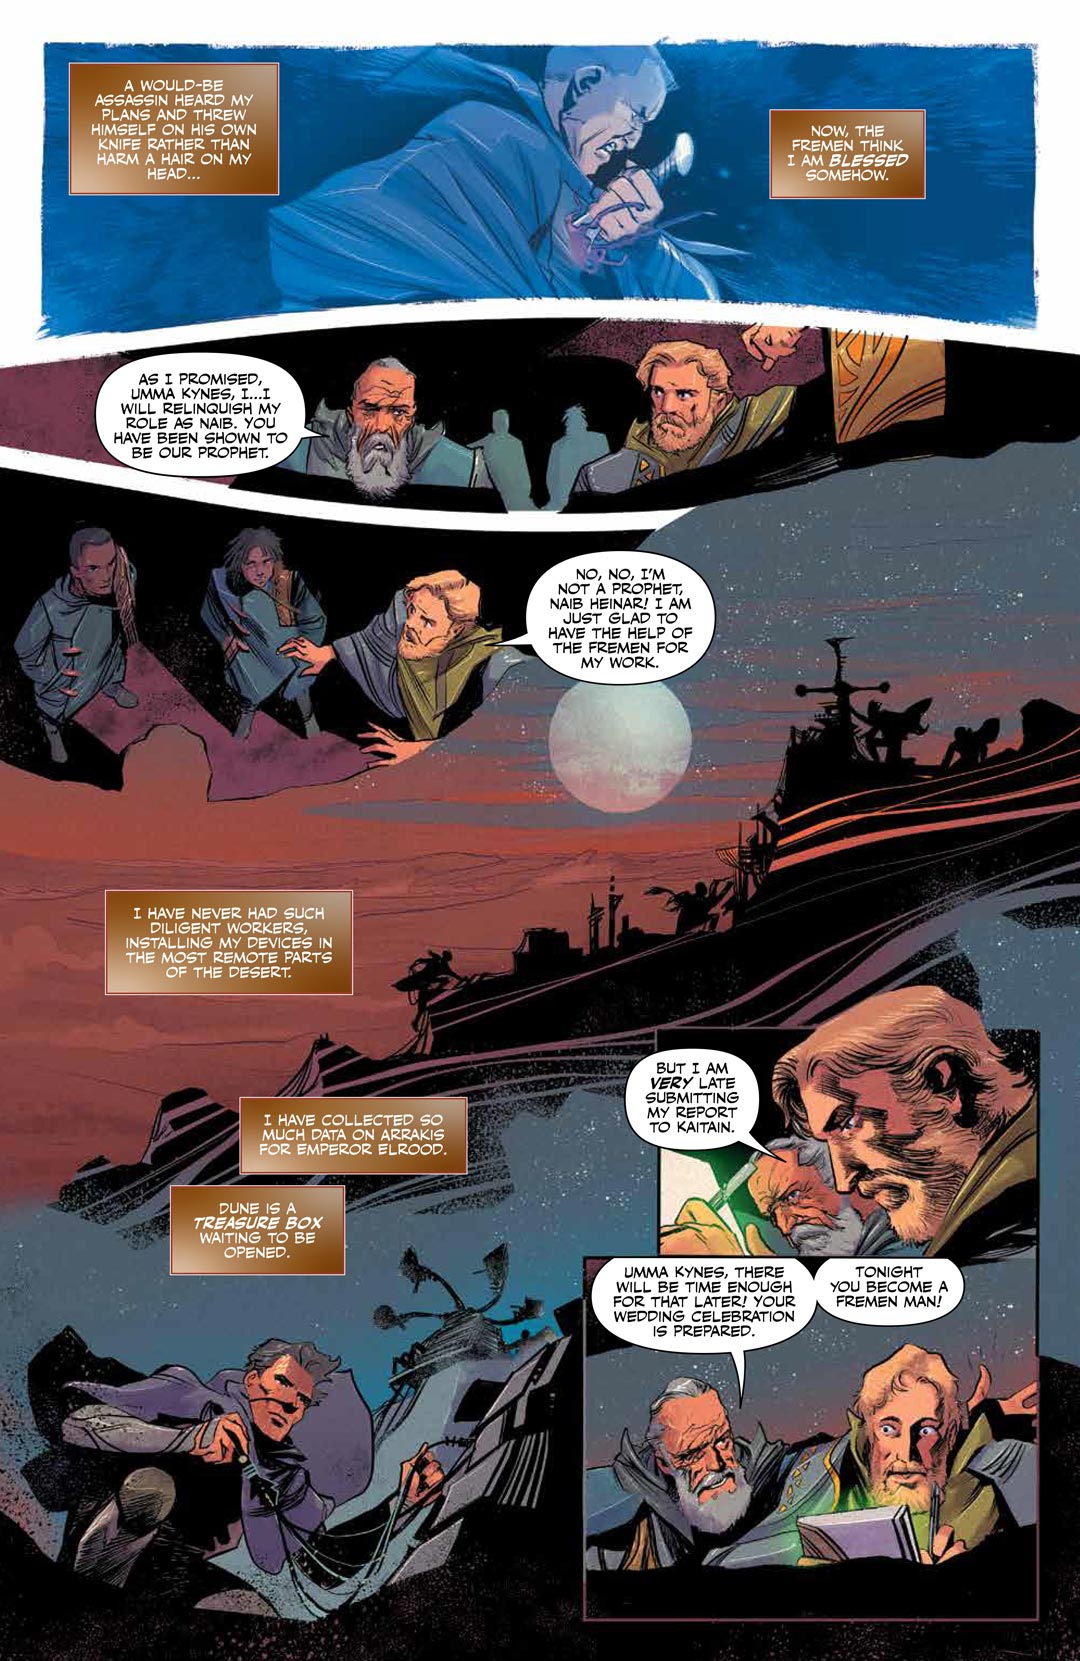 Dune: House Atreides comic series. Issue #7, preview page 2.